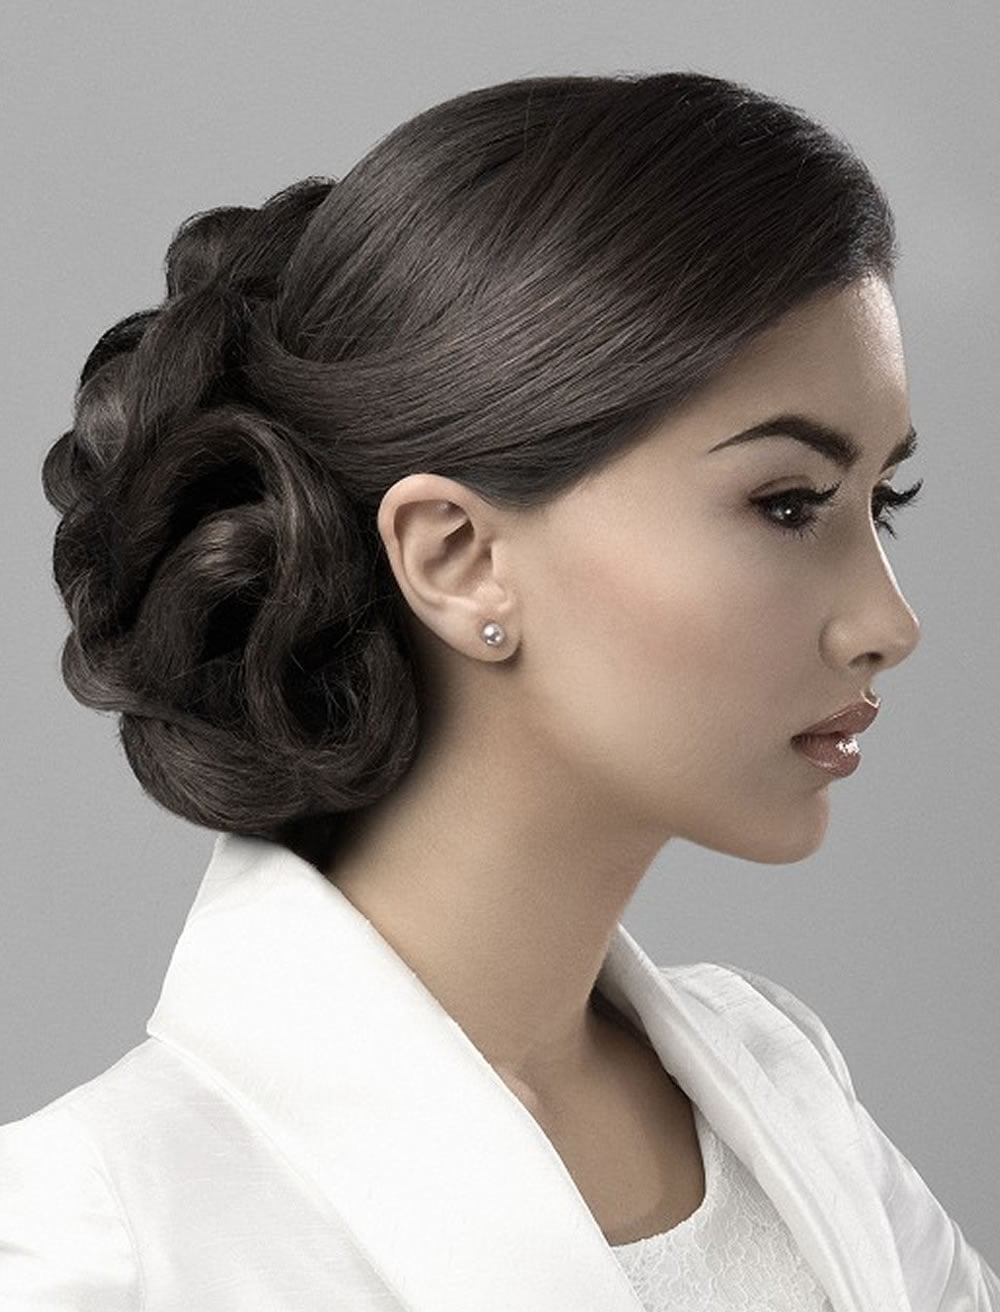 Prom Hairstyles For Square Faces